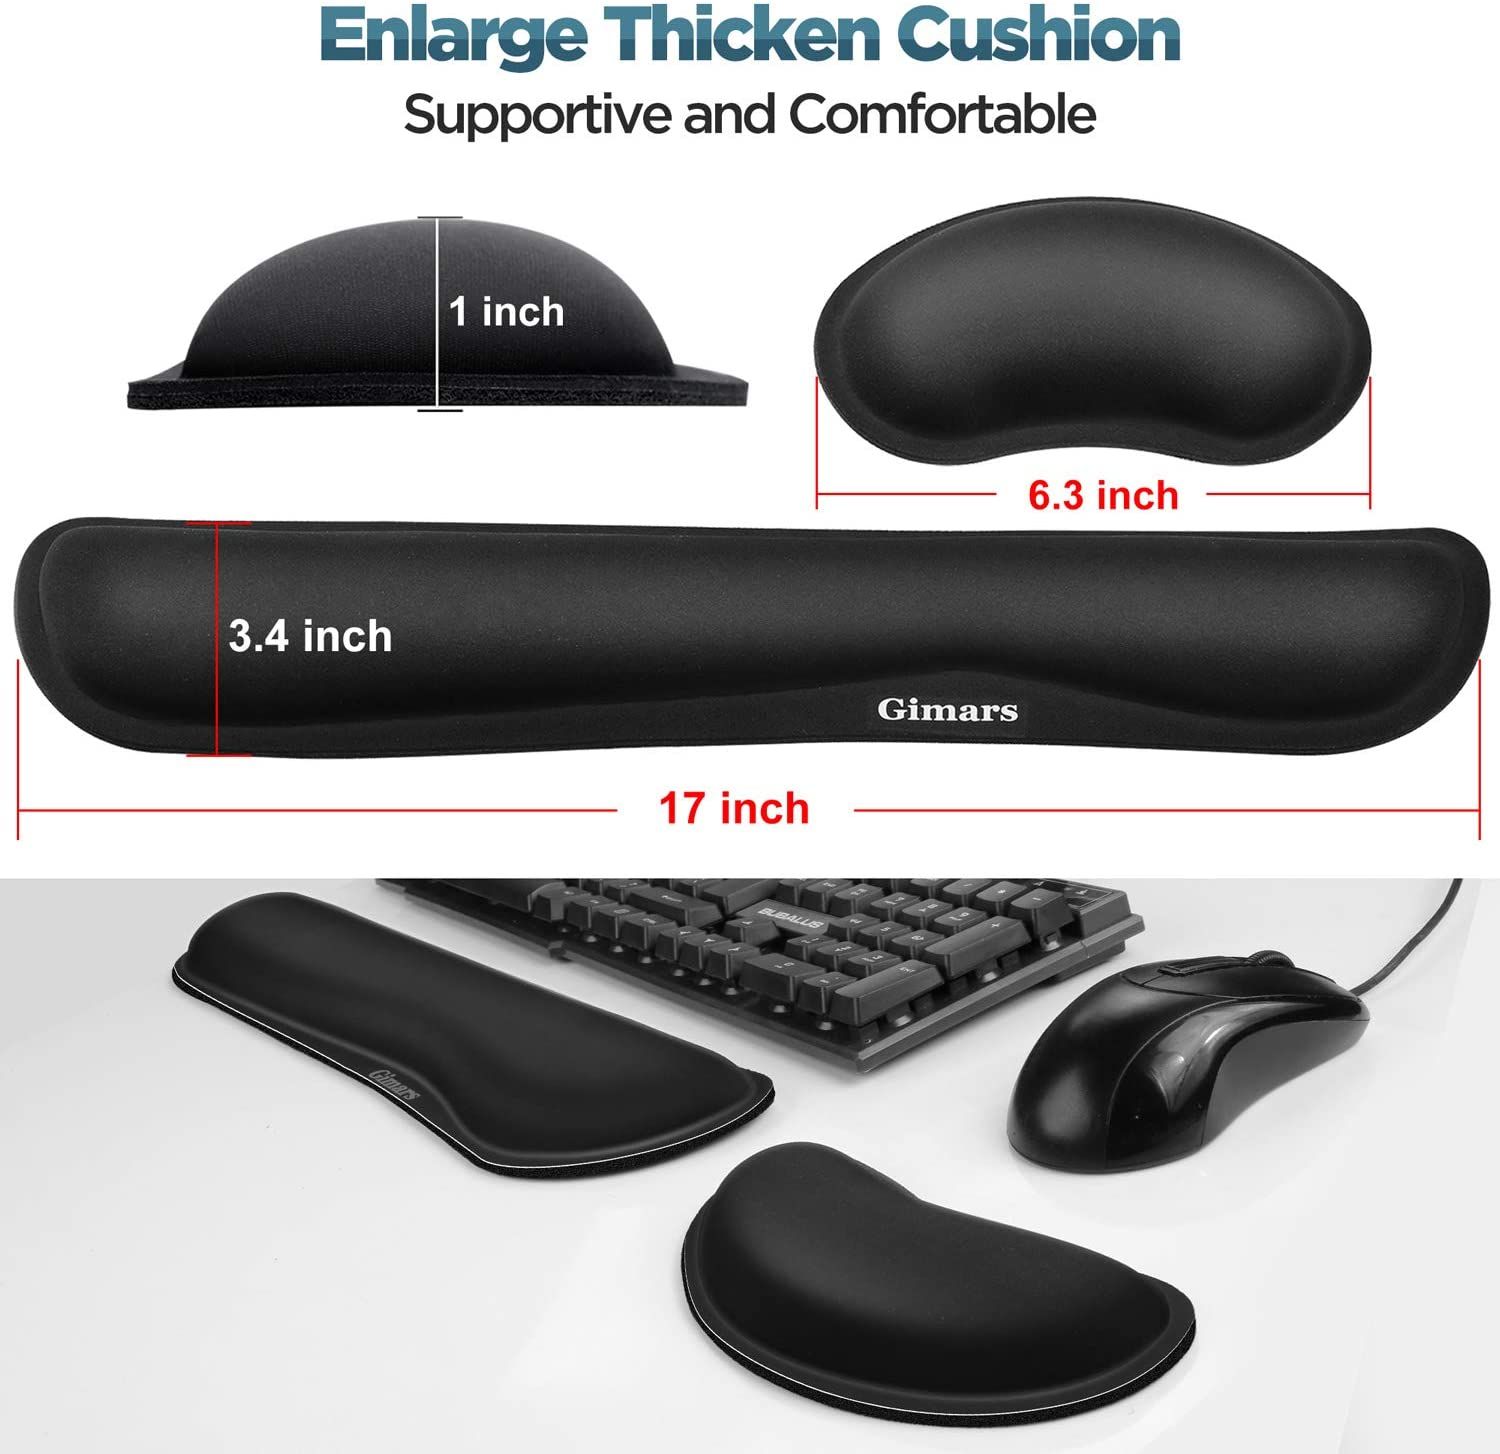 Dimensions of a Gimars wrist rest.